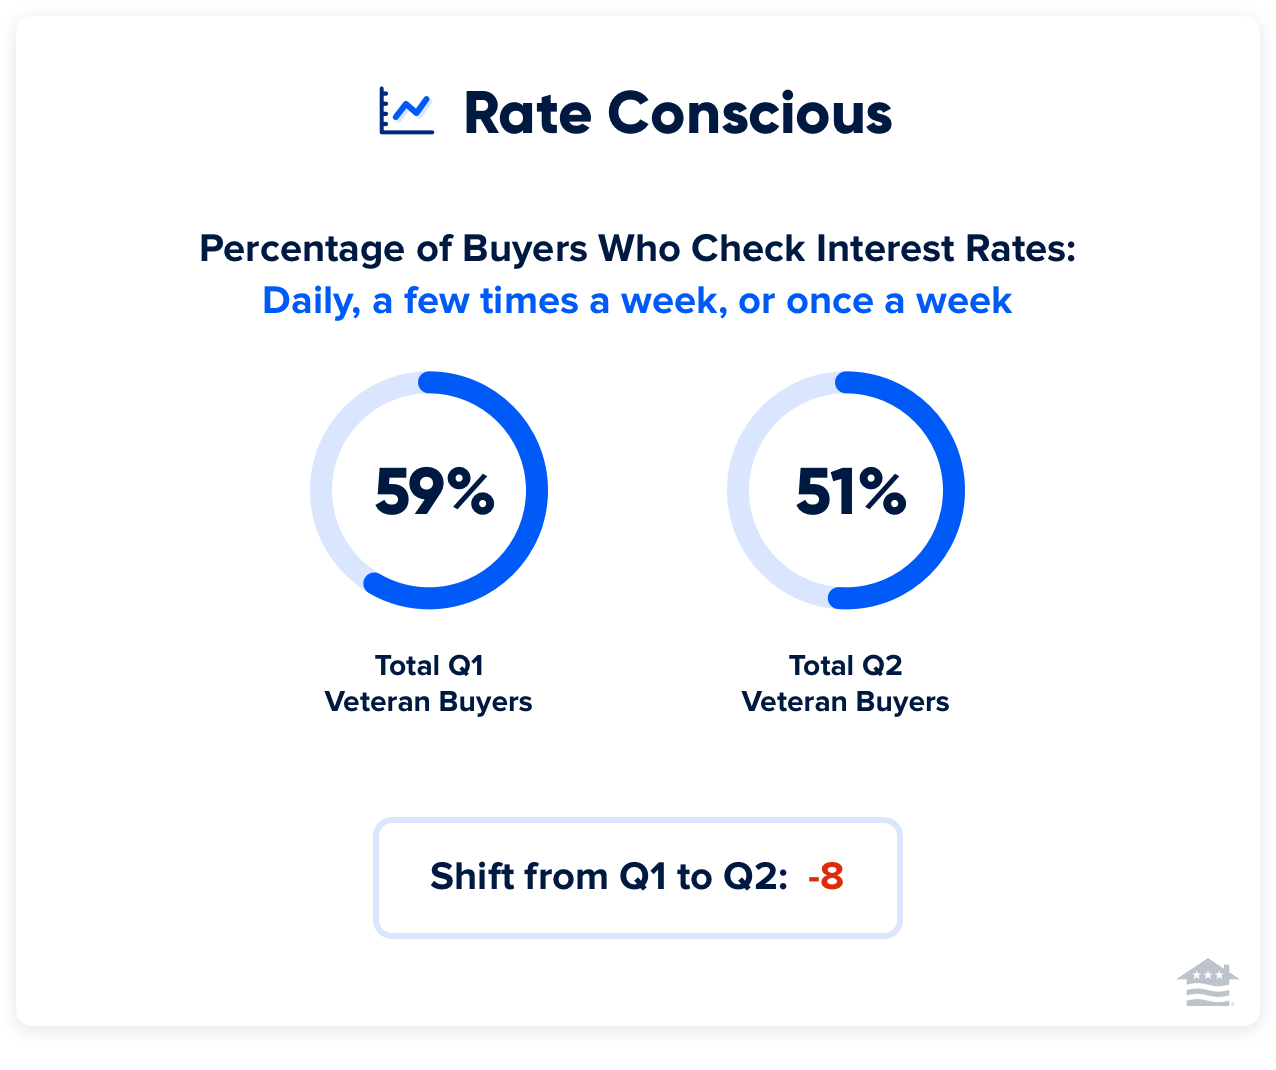 This chart shows that Veteran buyers are checking interest rates less frequently in the second quarter of this year than they were in the first quarter.